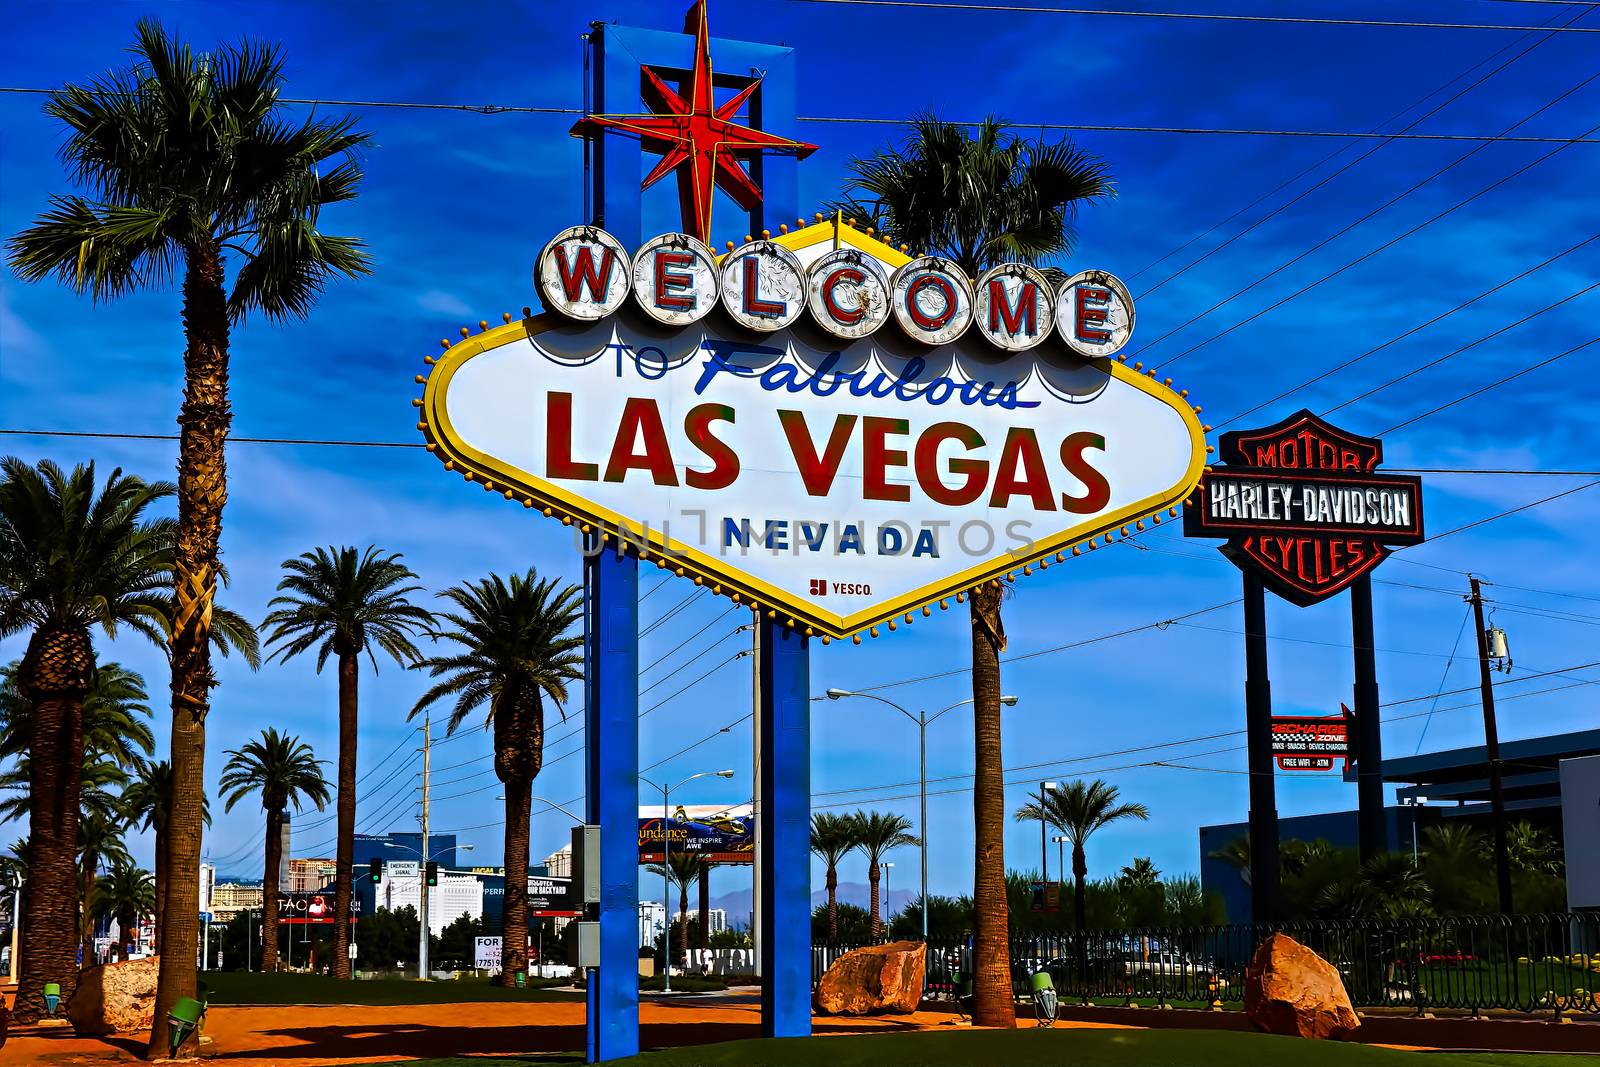 The Welcome to Fabulous Las Vegas sign on bright sunny day in Las Vegas, Nevada USA,07 Oct 2016